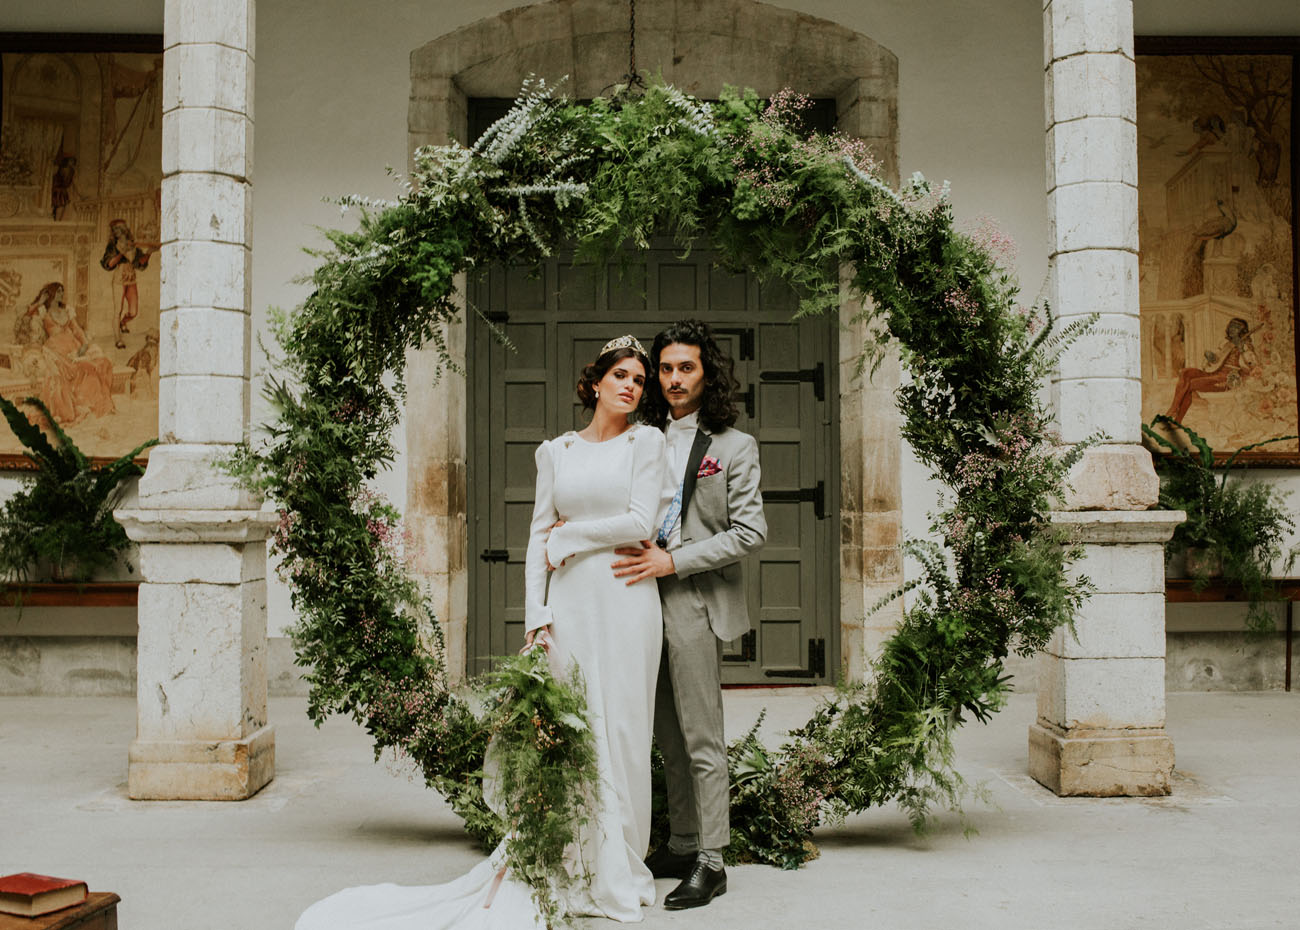 70s-Inspired Spanish Elopement Filled with Greenery